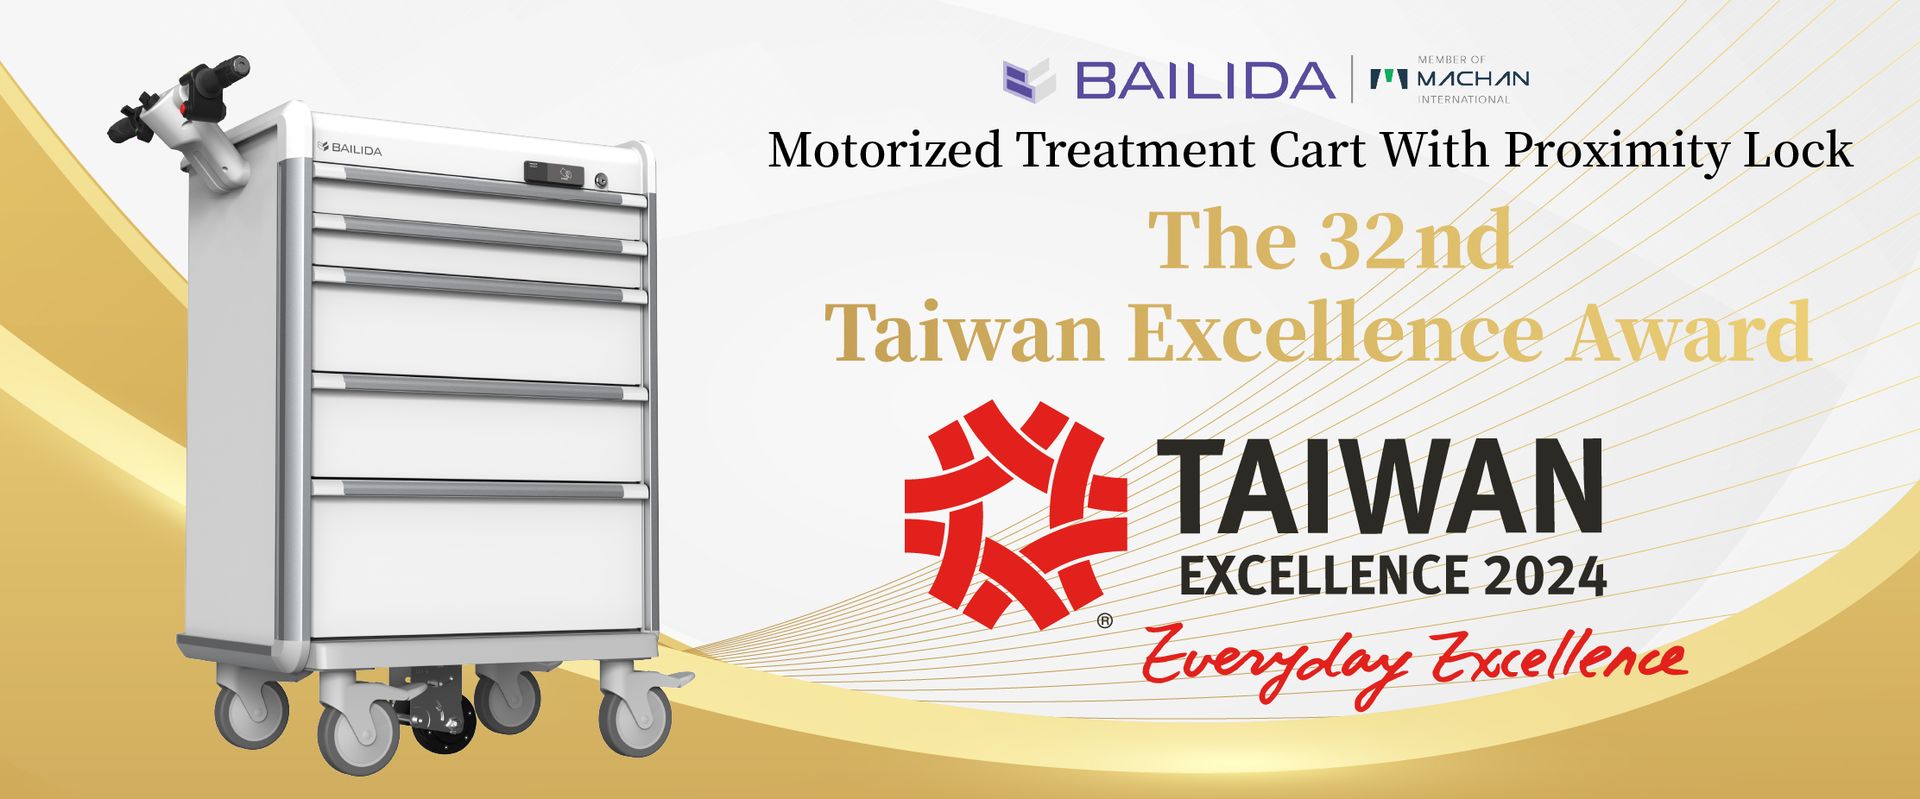 MACHAN has been awarded the 32nd Taiwan Excellence Award